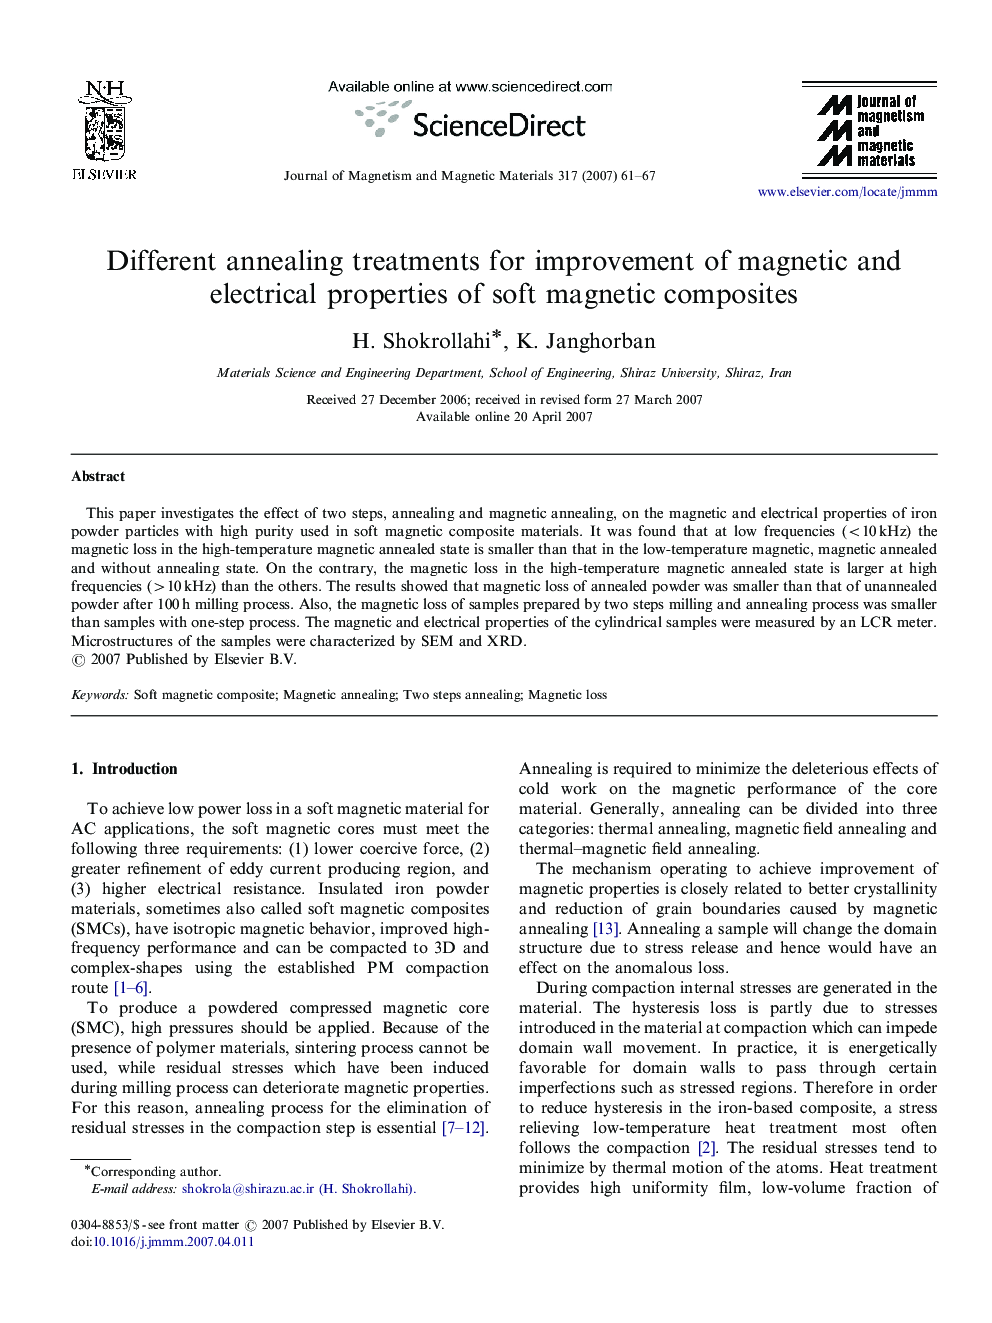 Different annealing treatments for improvement of magnetic and electrical properties of soft magnetic composites